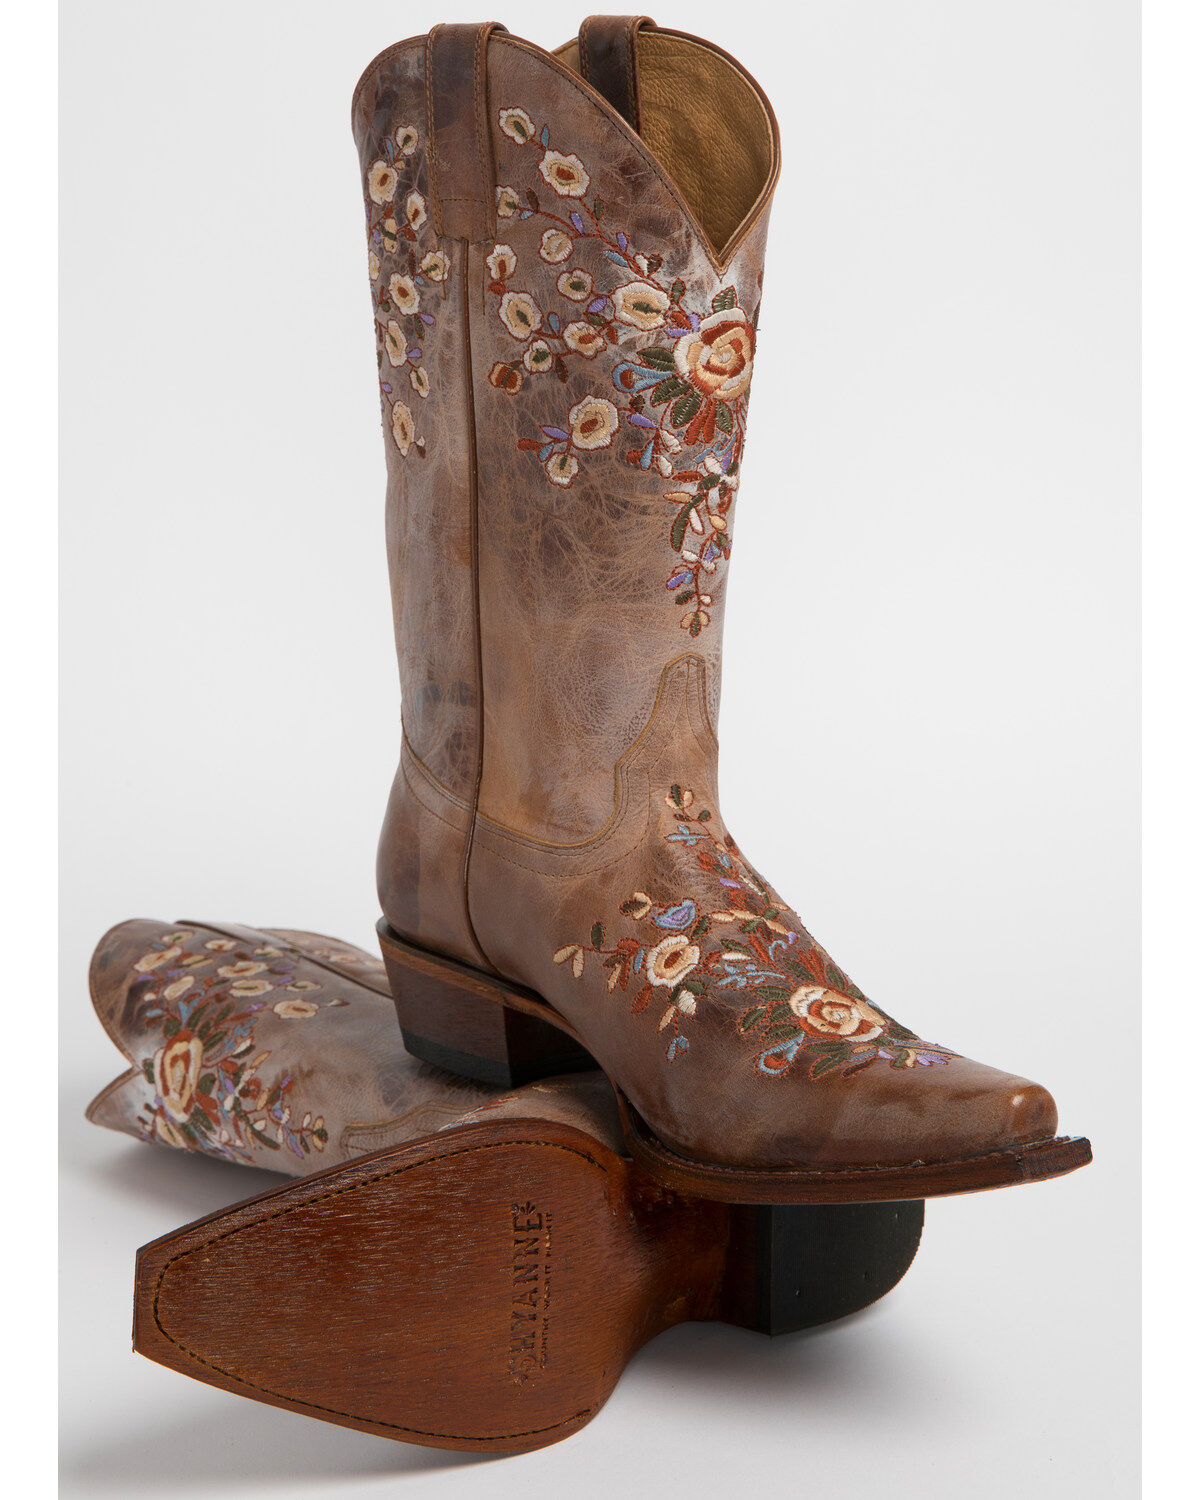 boots with embroidered flowers